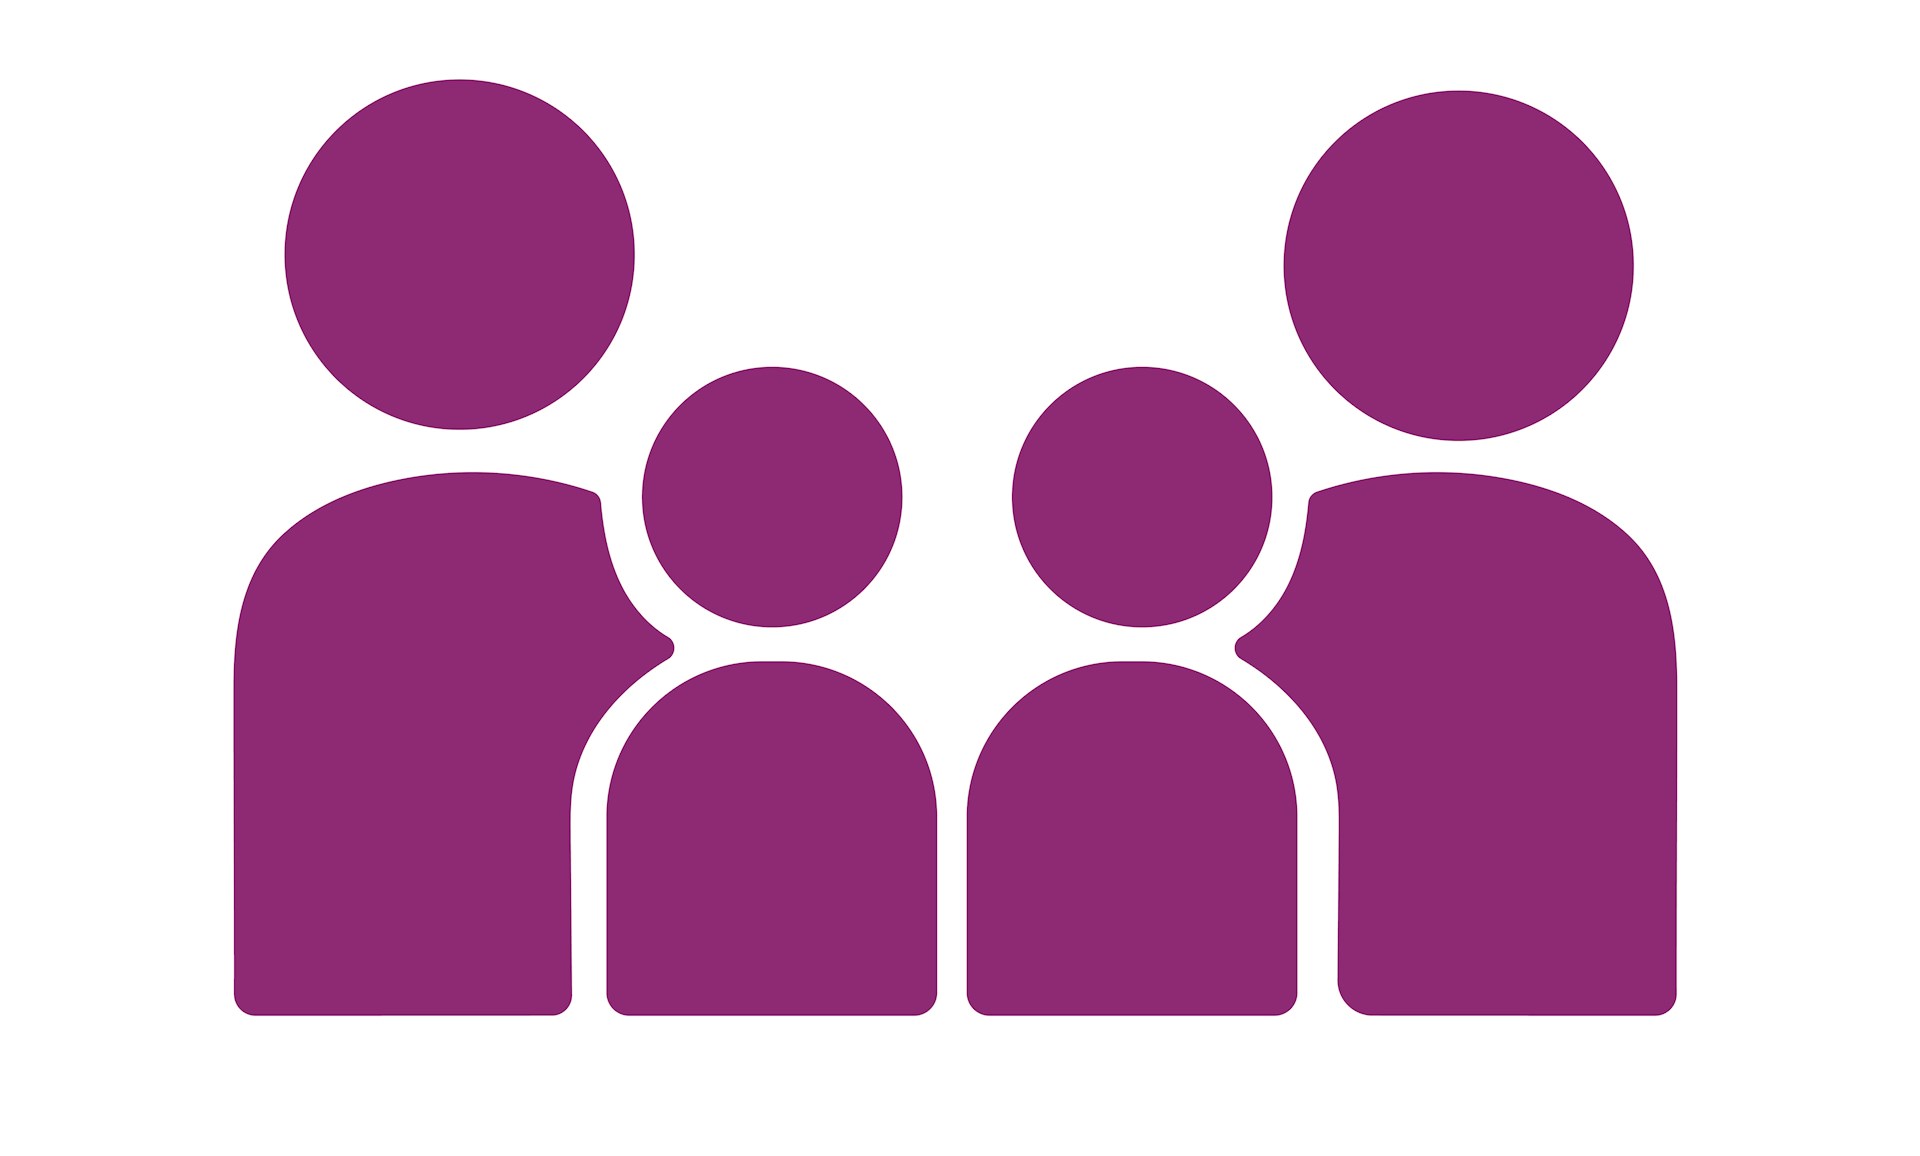 Four purple figures on a white background.